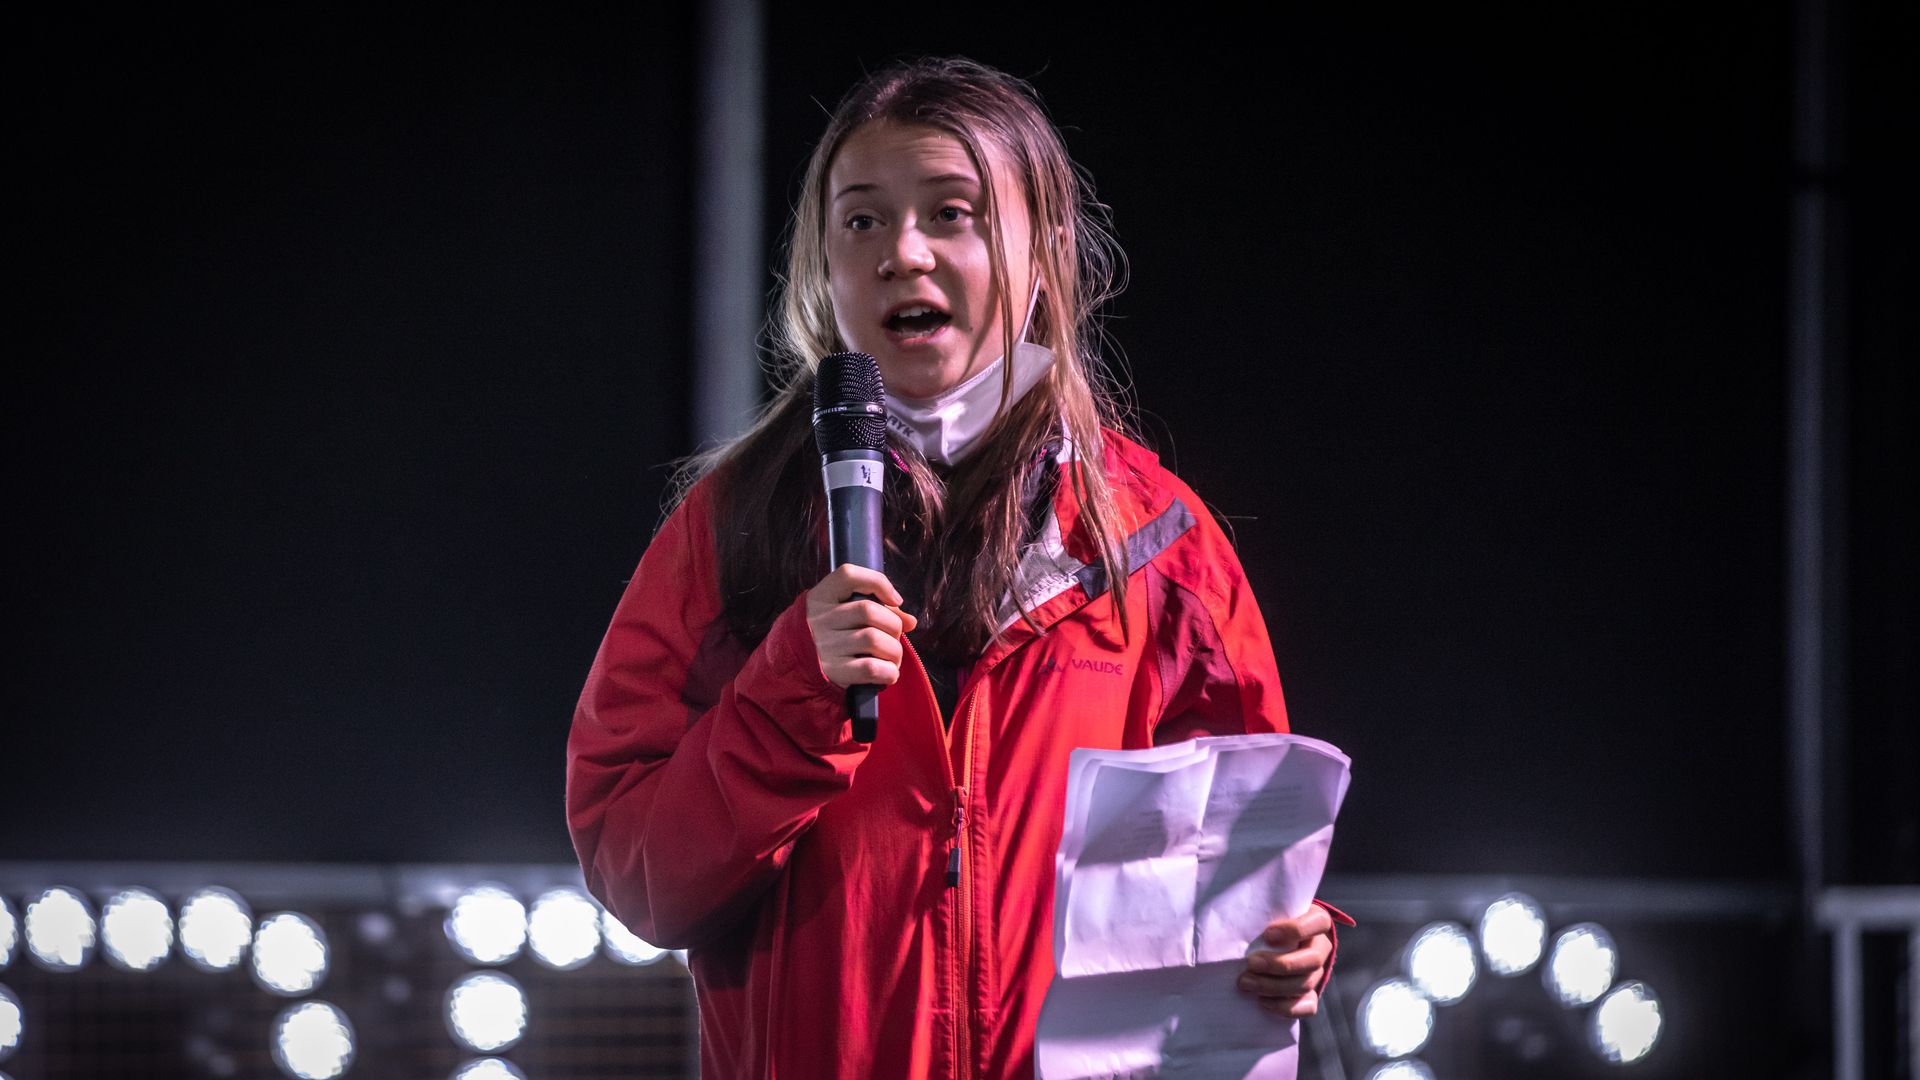 Greta Thunberg, Swedish environmentalist, speaks during a demonstration on "Youth Day" at the COP26 climate talks in Glasgow, U.K., on Friday, Nov. 5, 2021.